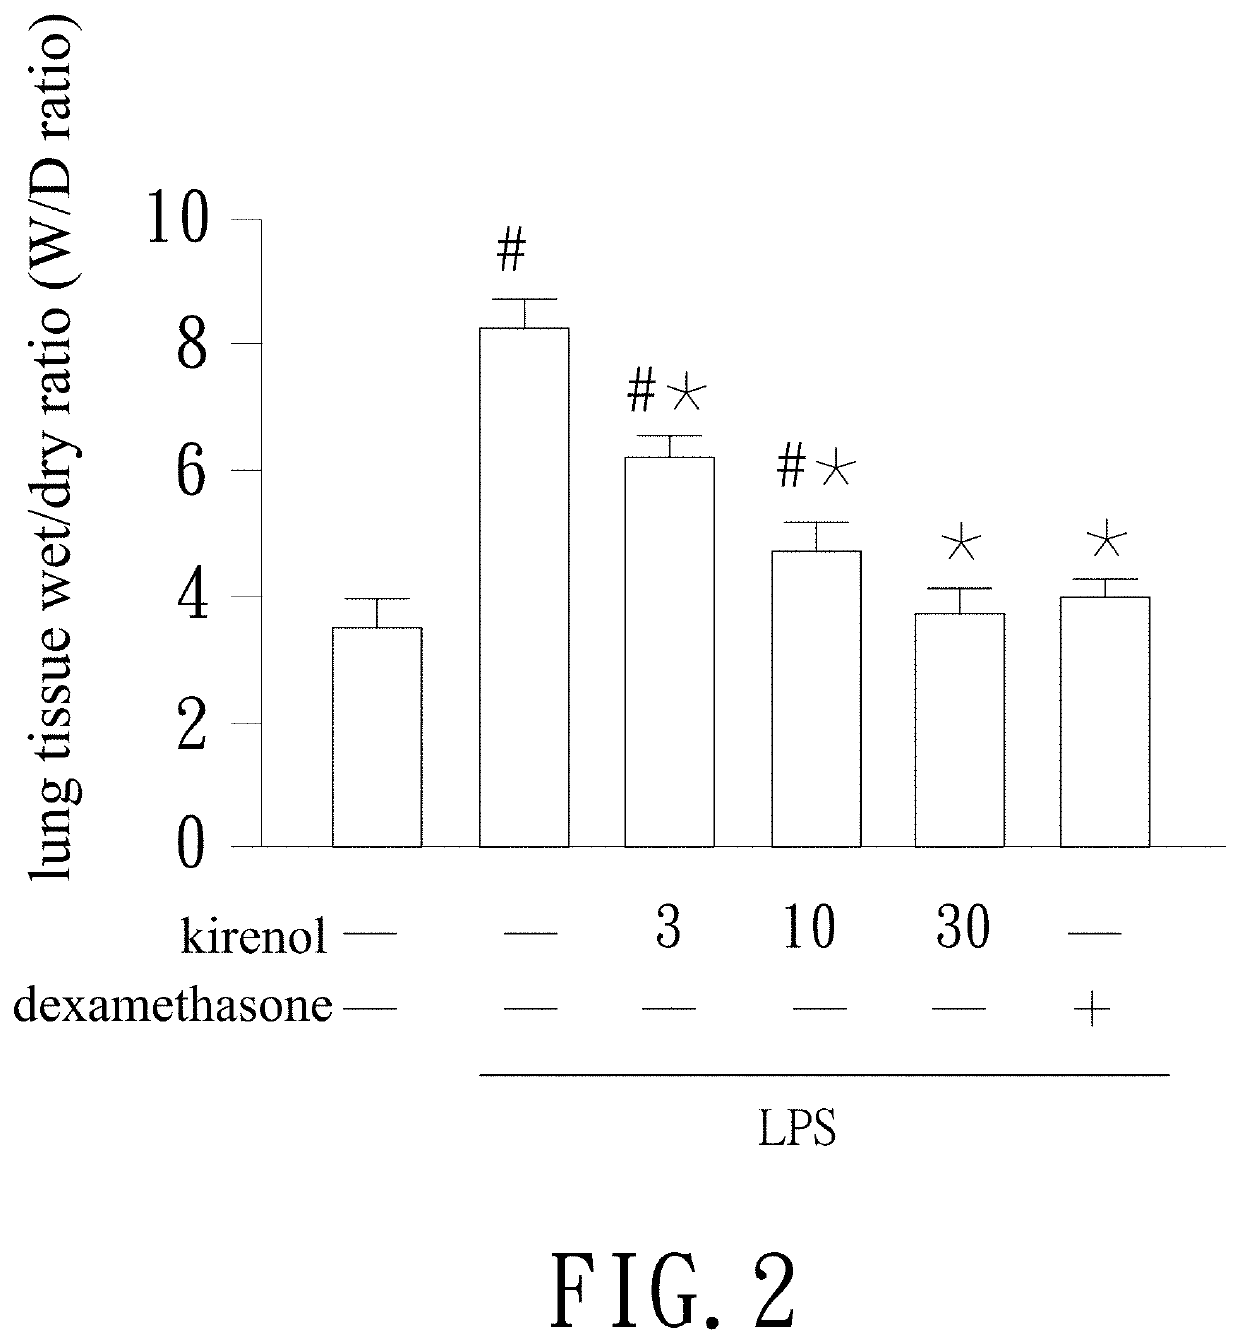 Method for treatment of acute lung injury by use of kirenol